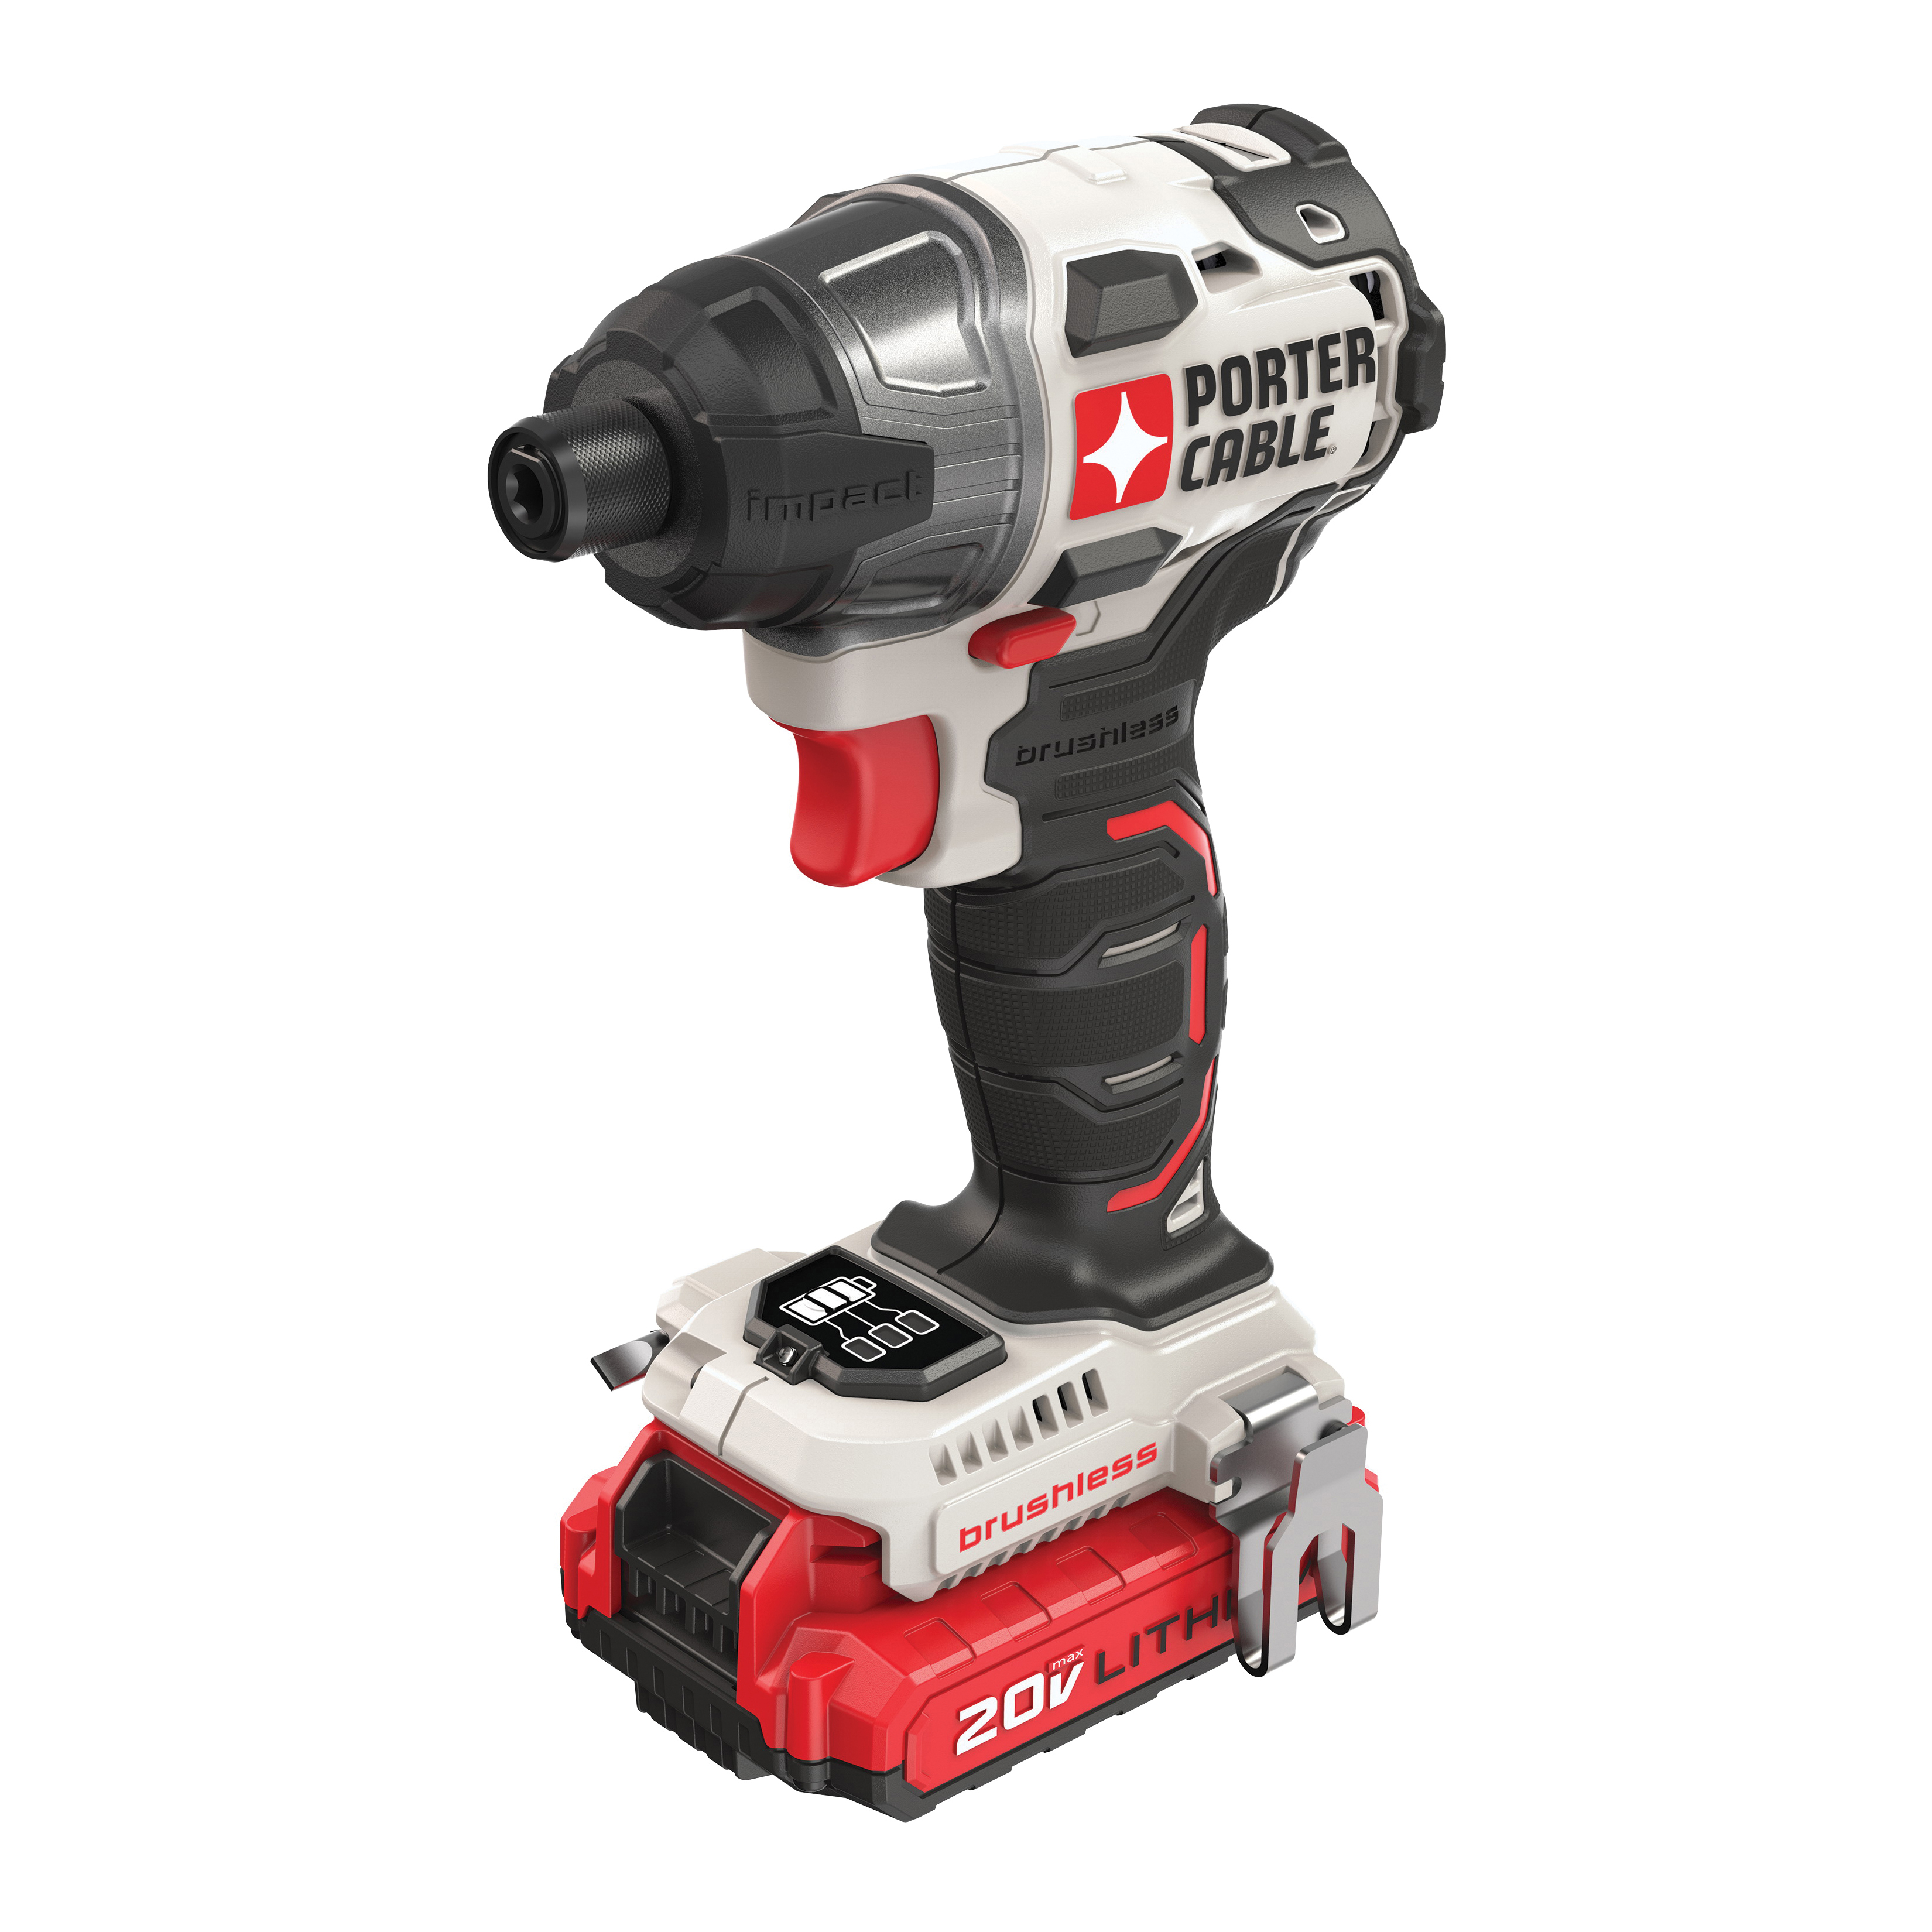 PCCK647LB Impact Driver, Battery Included, 20 V, 1/4 in Drive, Hex Drive, 3100 ipm